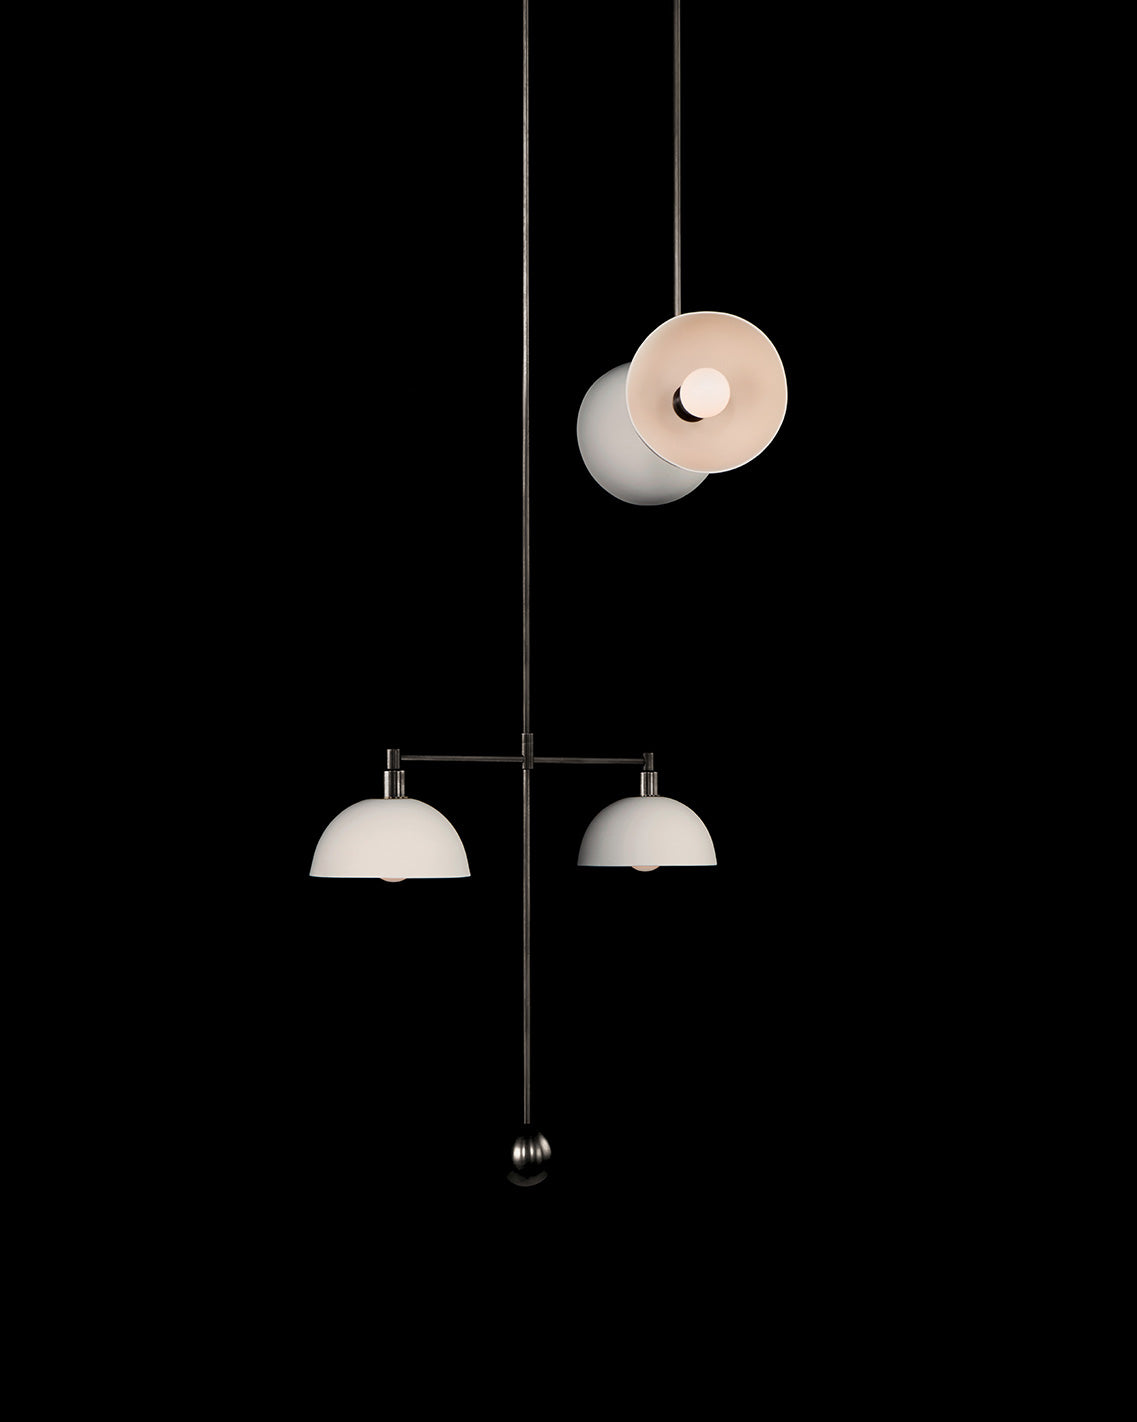 TRAPEZE : 4 MOBILE ceiling pendant in Blackened Brass finish with Porcelain bowls, hanging against a black wall. 